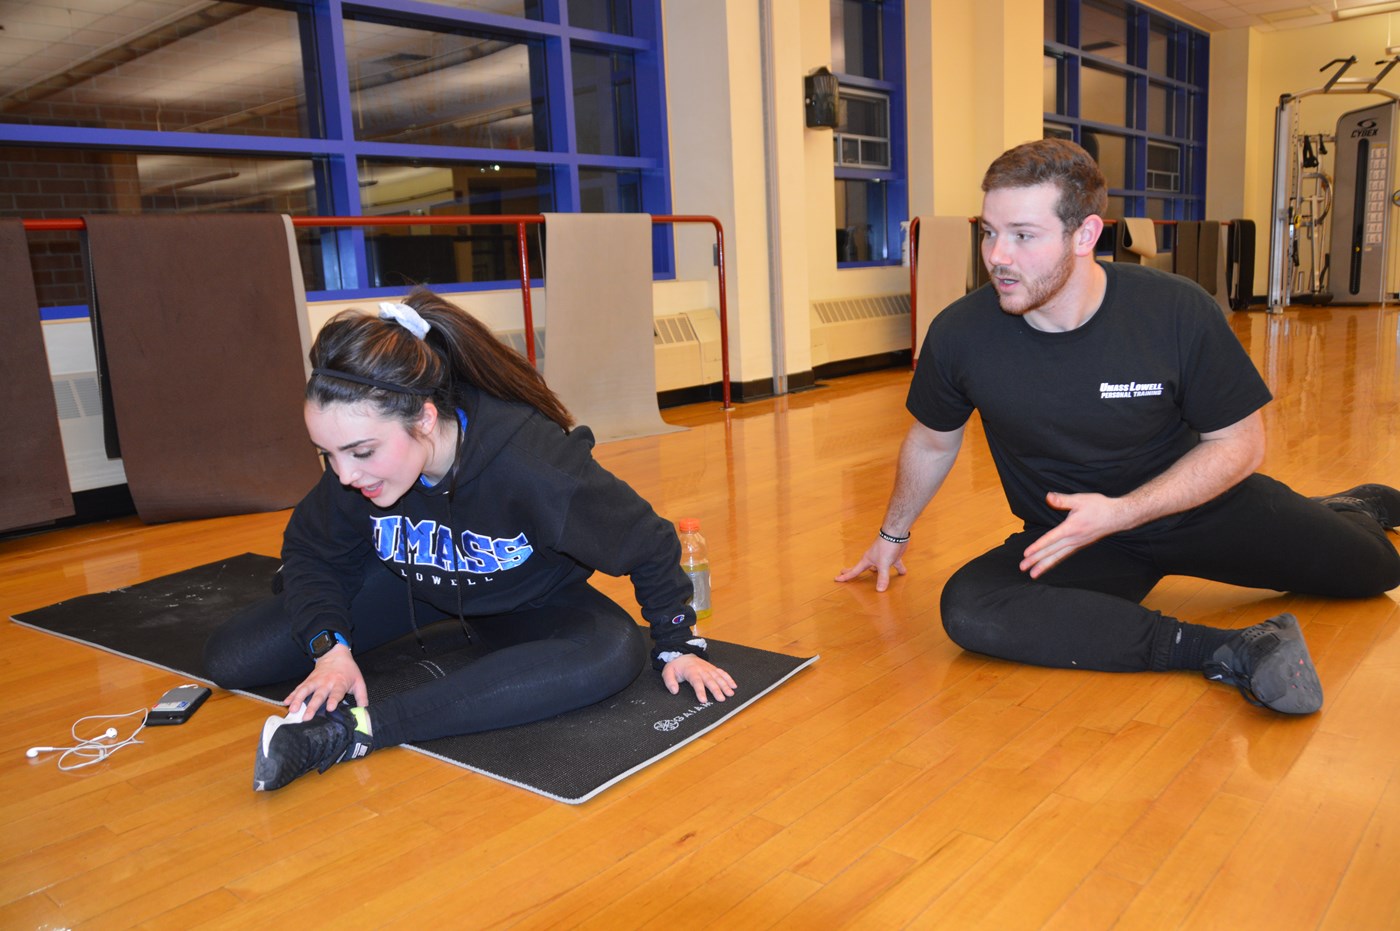 Student personal trainer instructing client inside CRC studio.